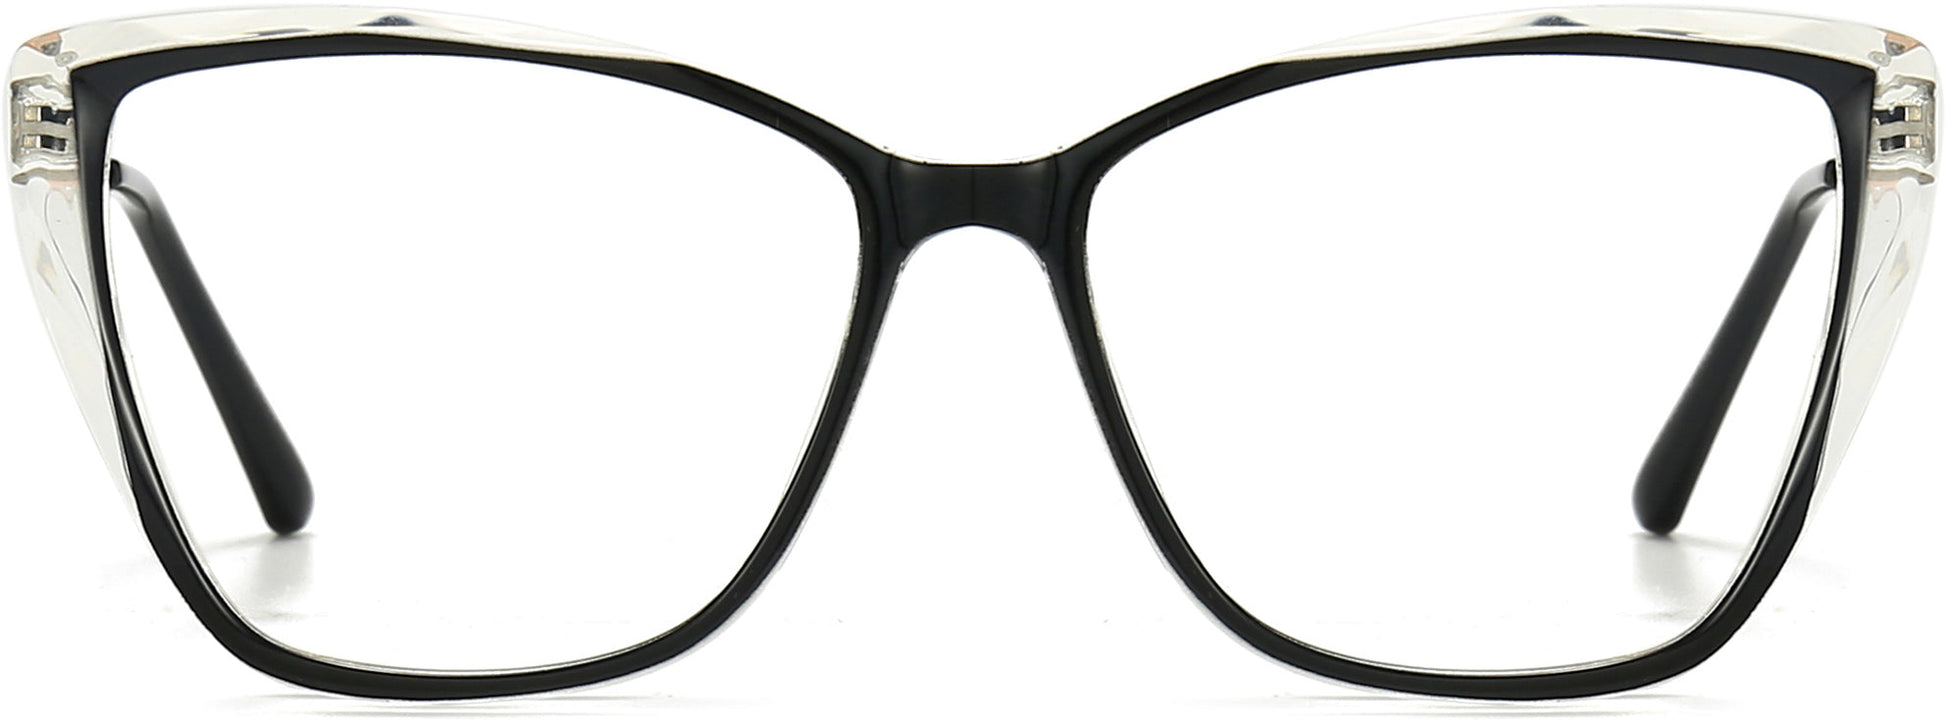 Dayana Cateye Black Eyeglasses from ANRRI, front view